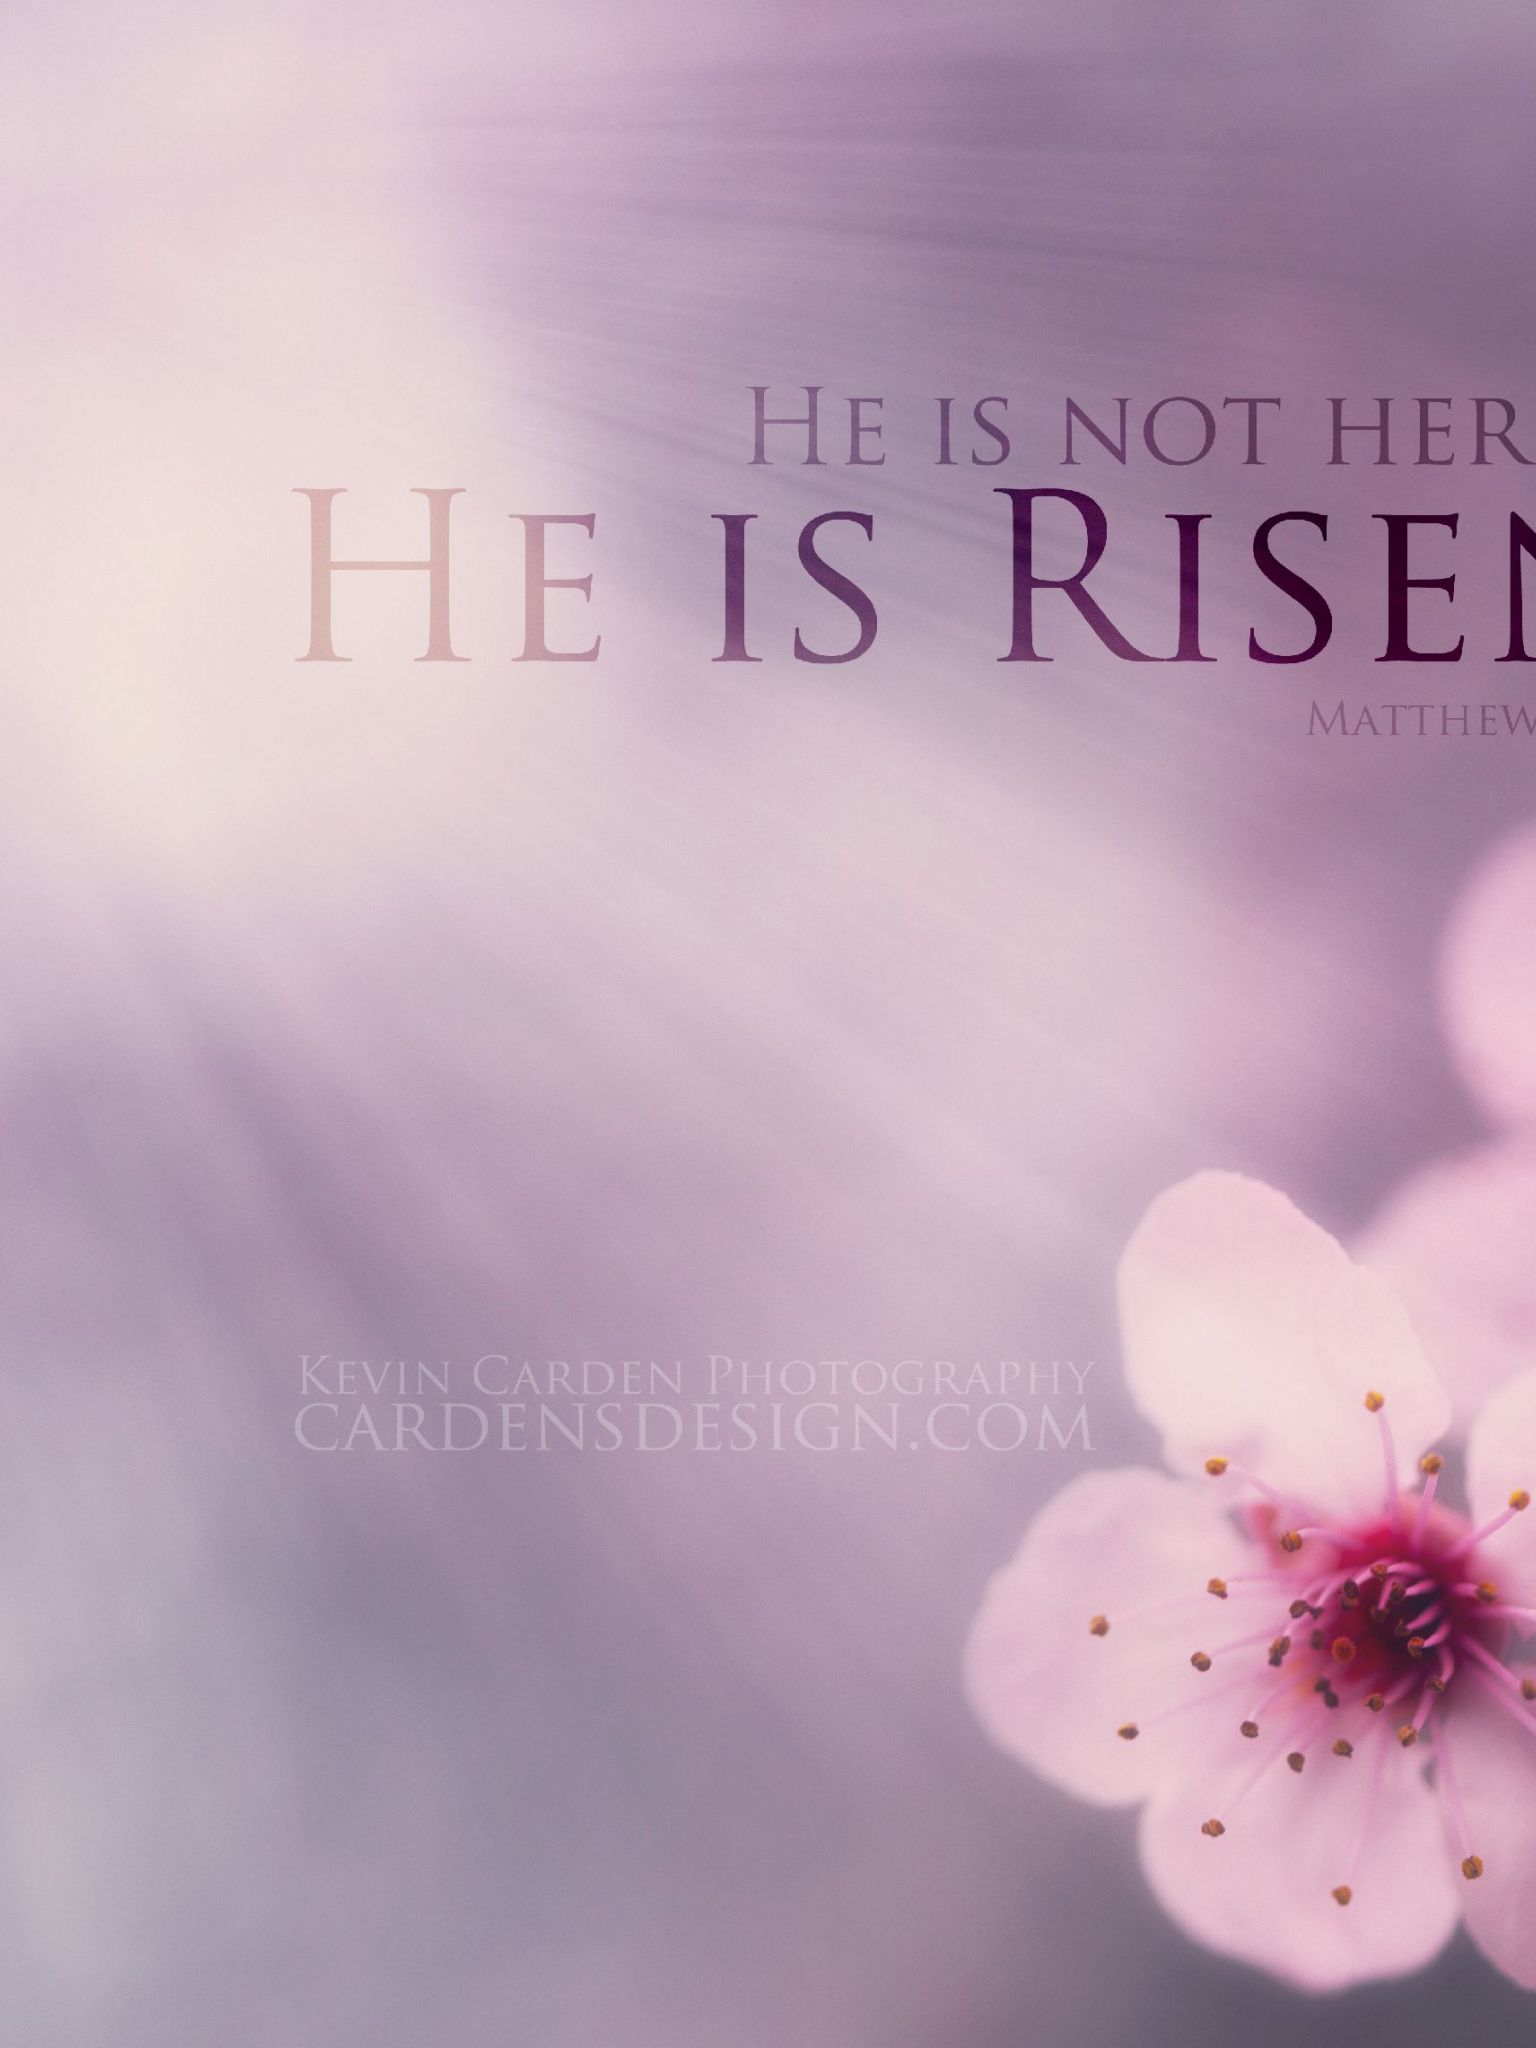 Free download He is risen beautiful wallpaper With Resolutions 36502282 Pixel [3650x2282] for your Desktop, Mobile & Tablet. Explore Religious Easter Wallpaper Image. Free Easter Wallpaper for Desktop, Happy